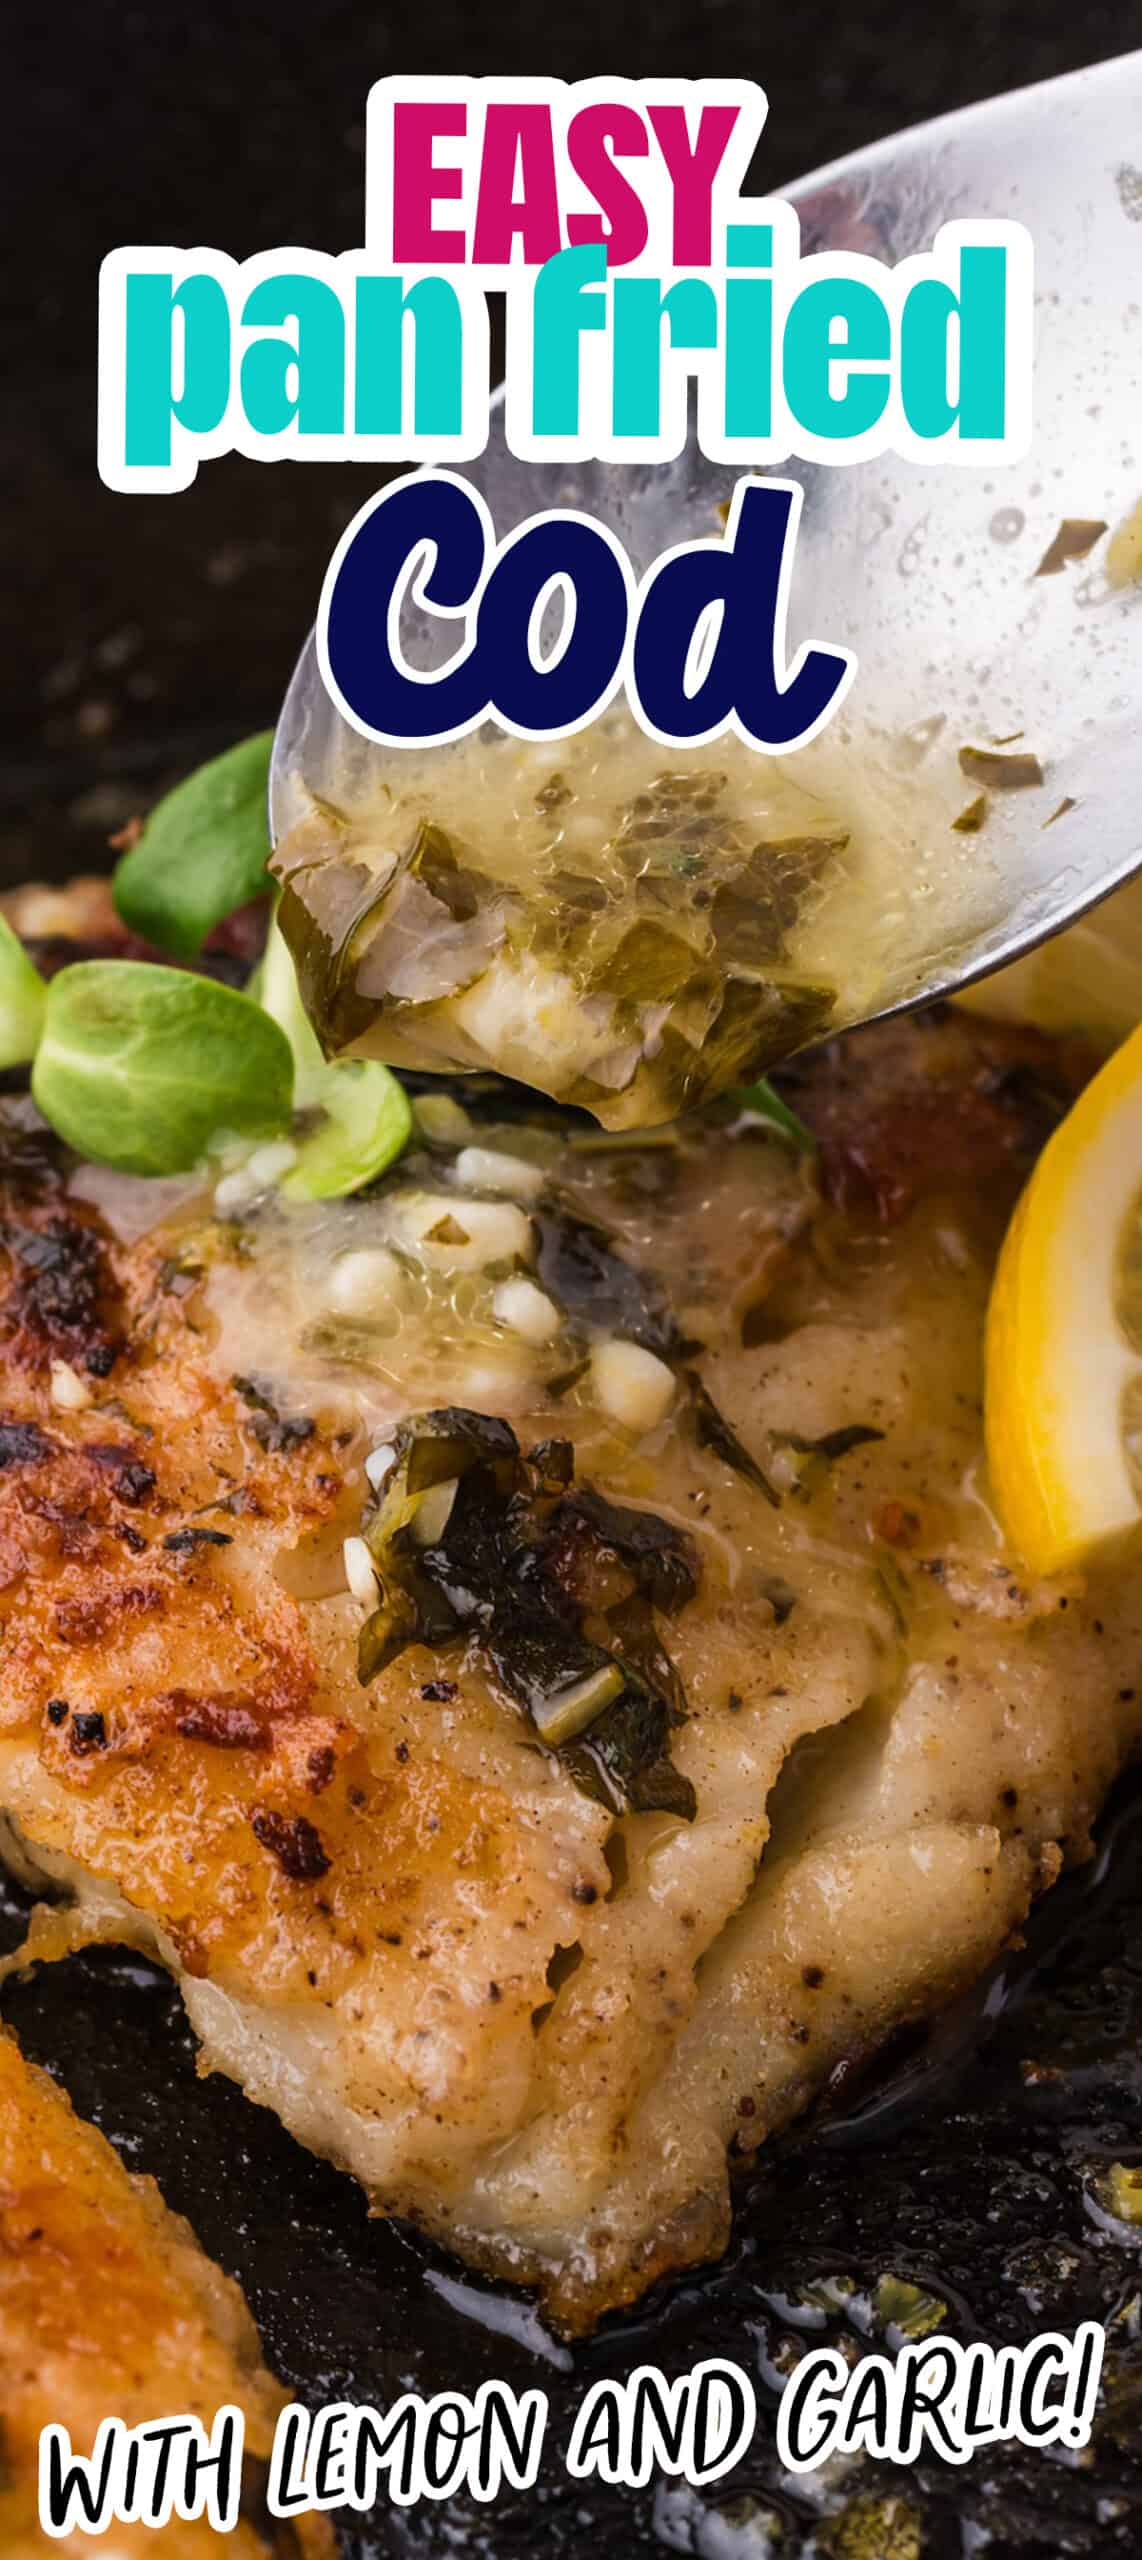 Simple pan fried cod recipe with lemon and garlic.